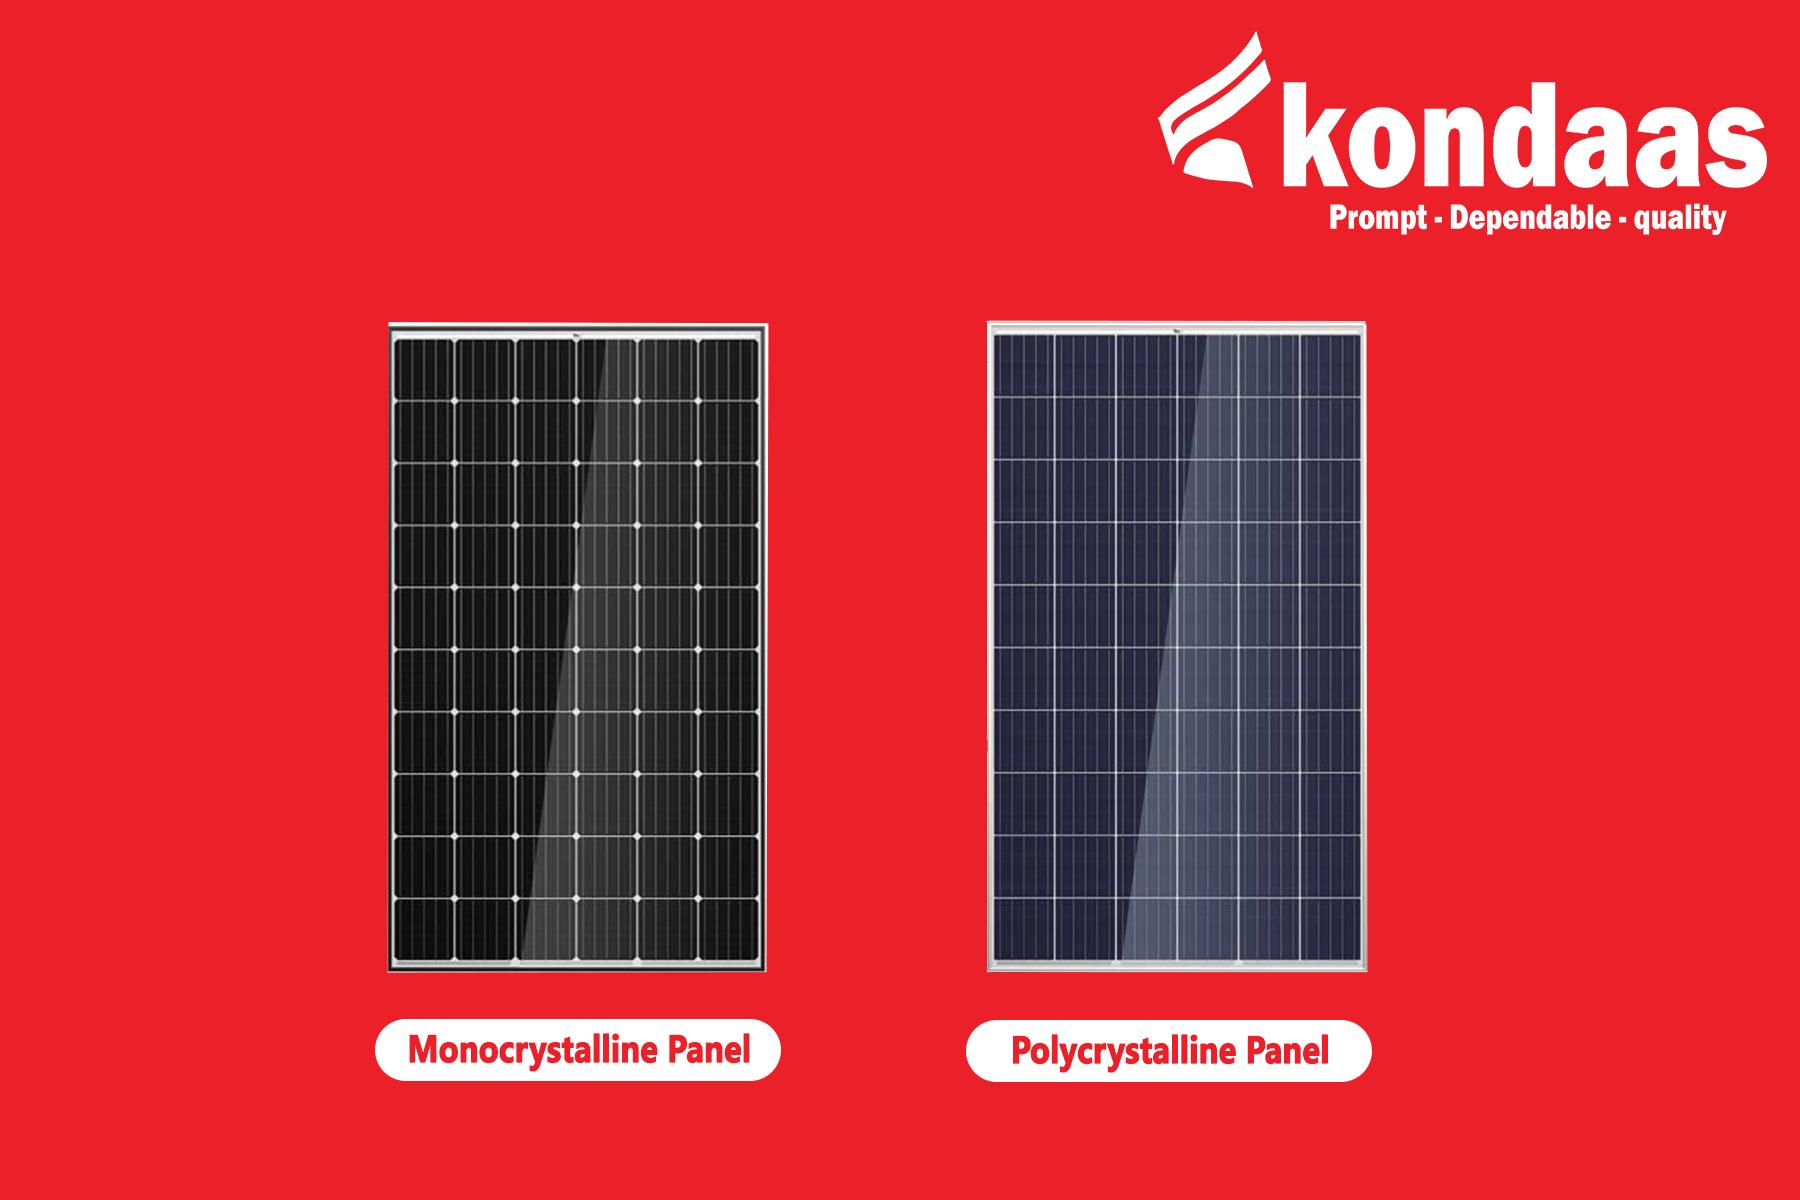 Difference between Monocrystalline and Polycrystalline Panels